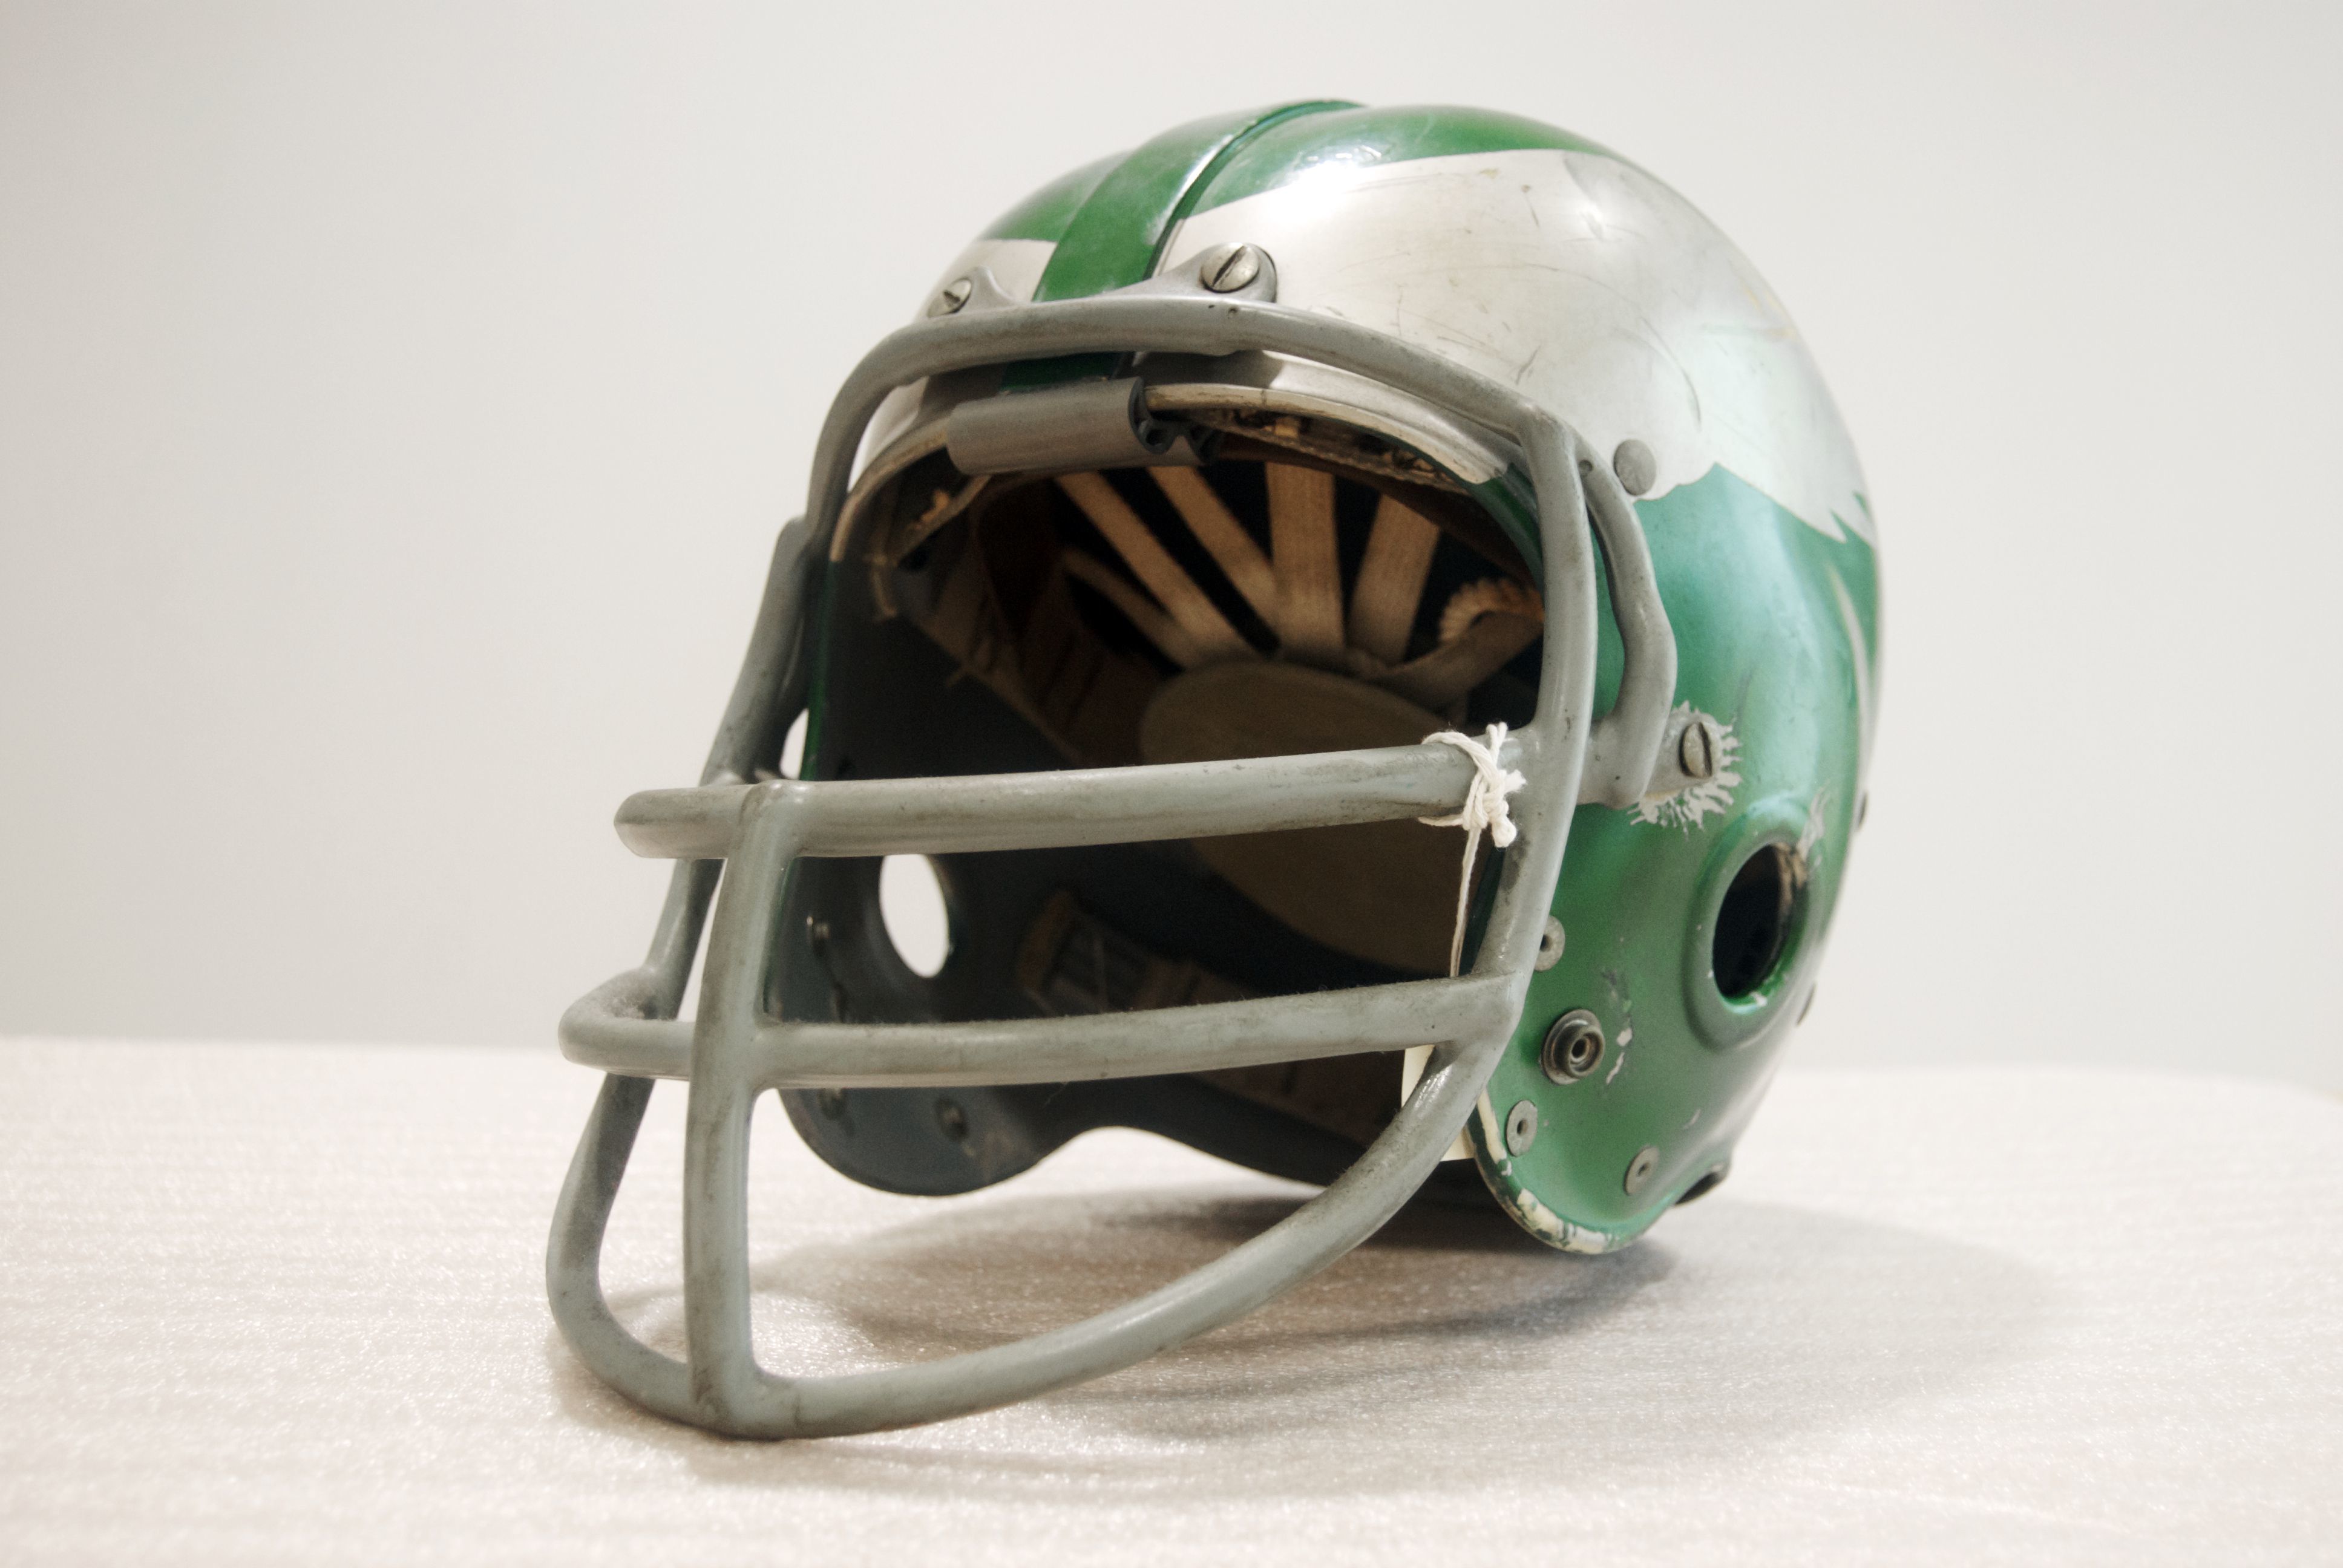 Pro Football Hall of Fame: 9 Eagles artifacts, from Nick Foles